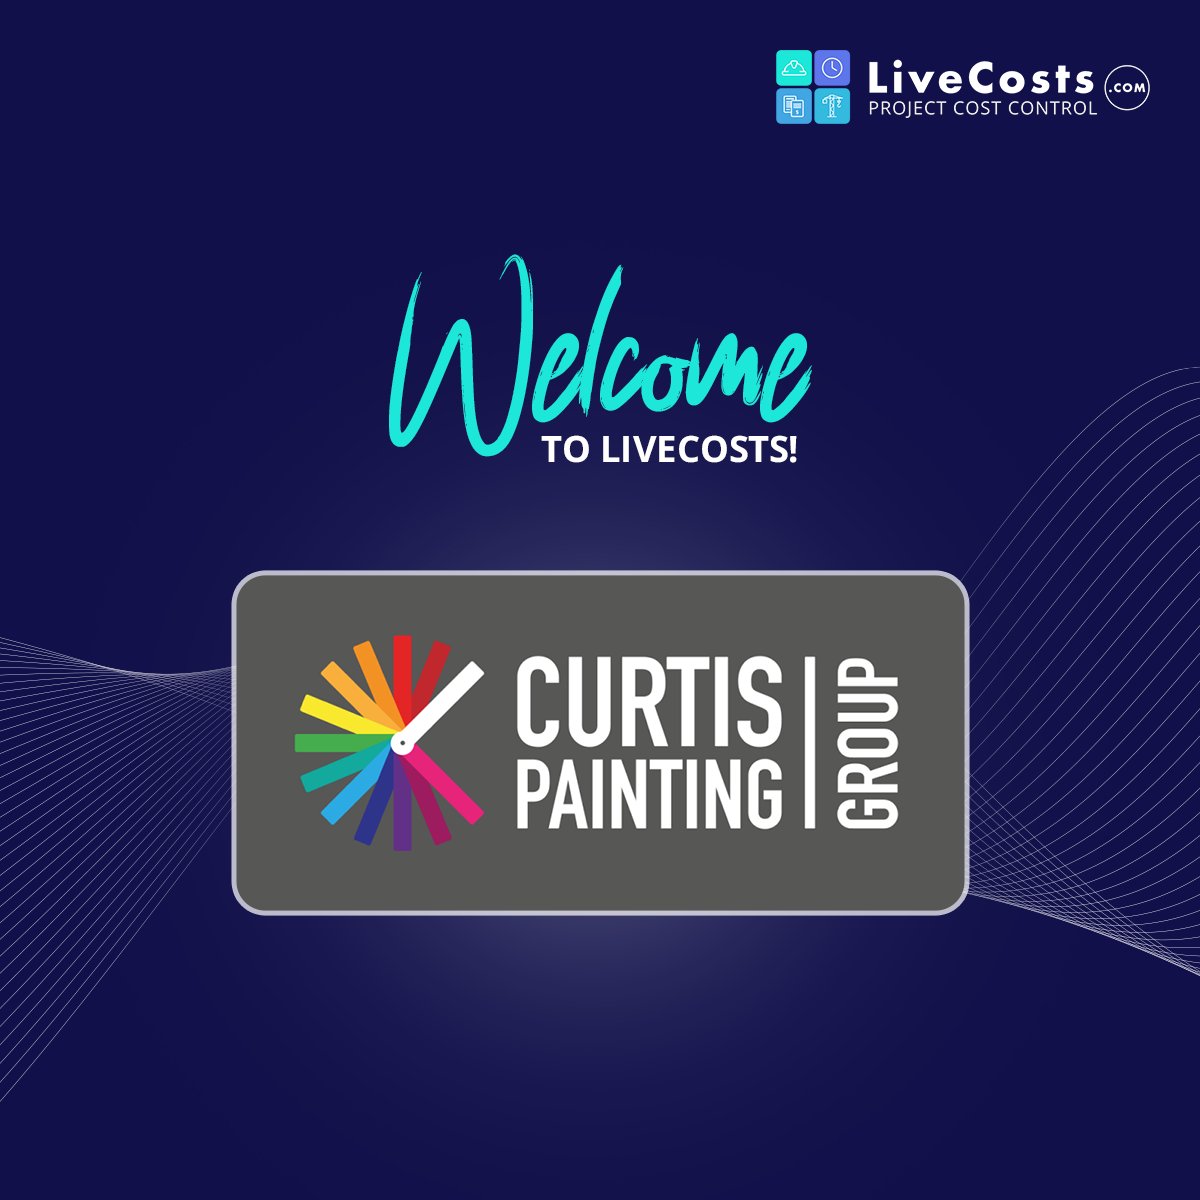 LiveCosts are excited to welcome Curtis Painting Group - We look forward to working with the team 👥

#ConstructionCosts #Construction